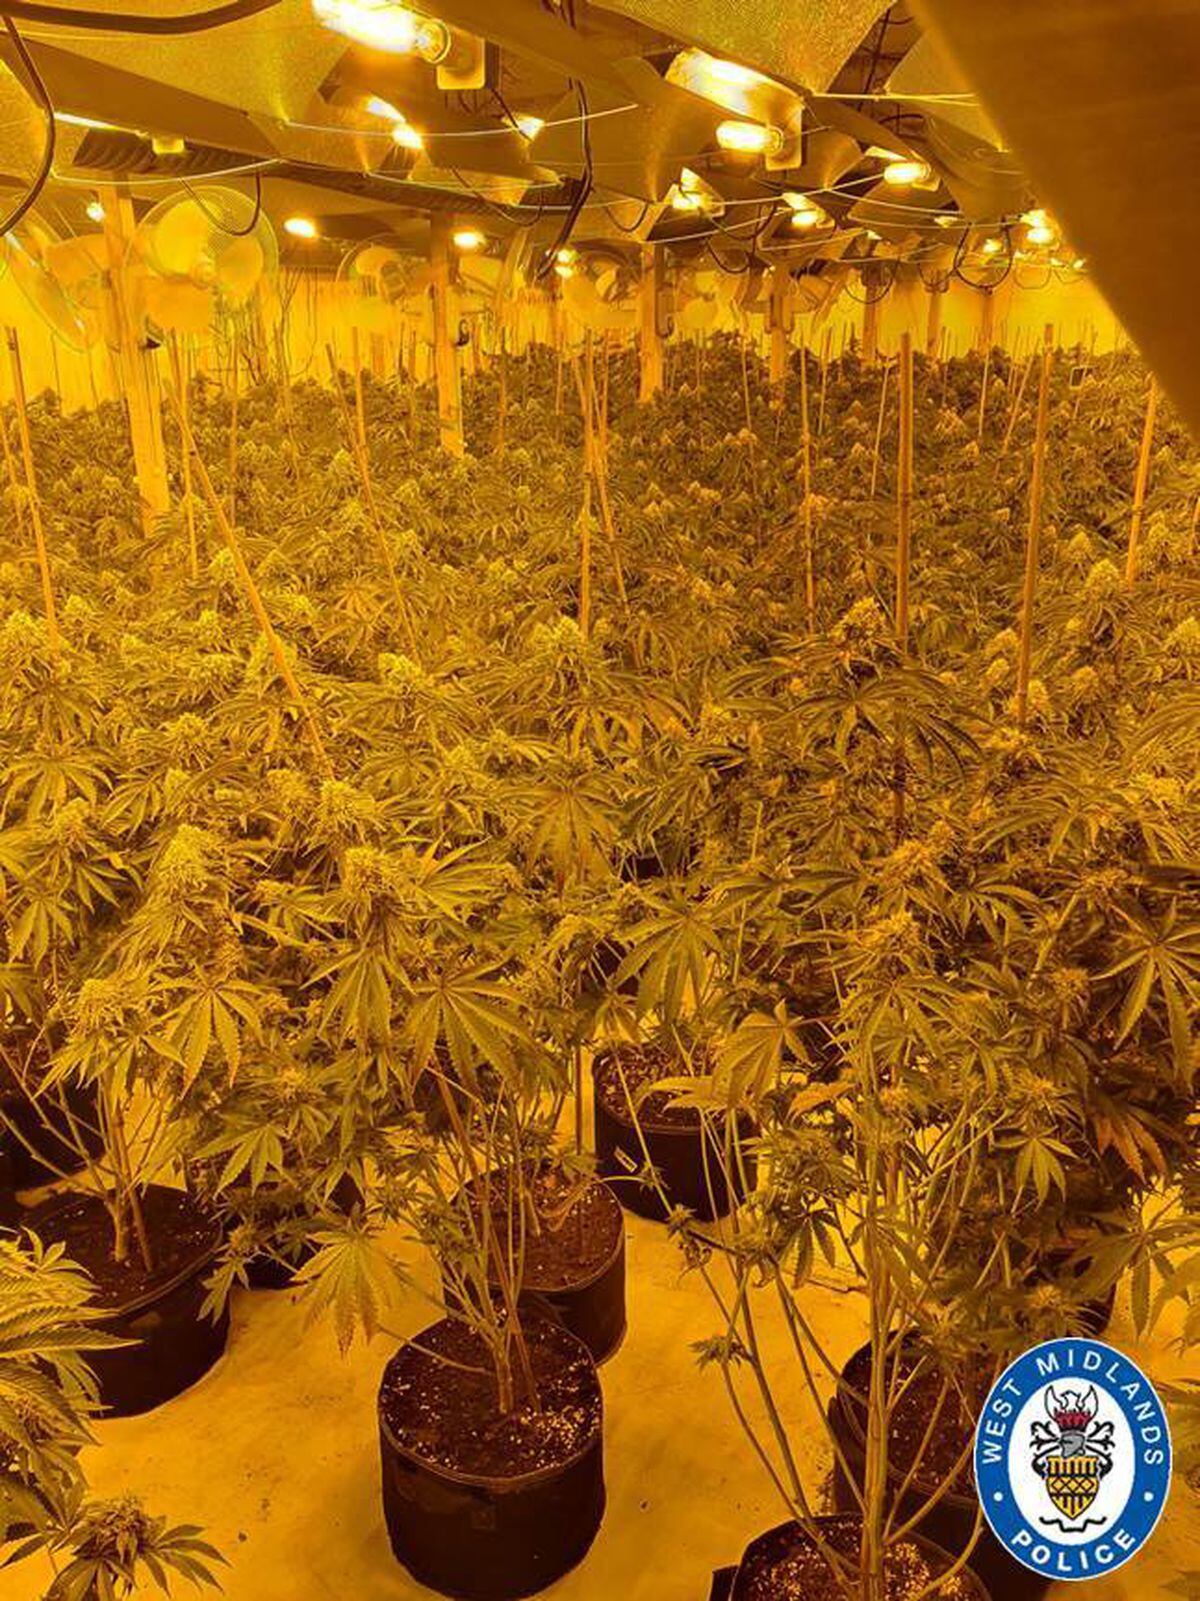 The cannabis factory, worth up to £1.5 million, was found at an industrial unit in Sutton Coldfield